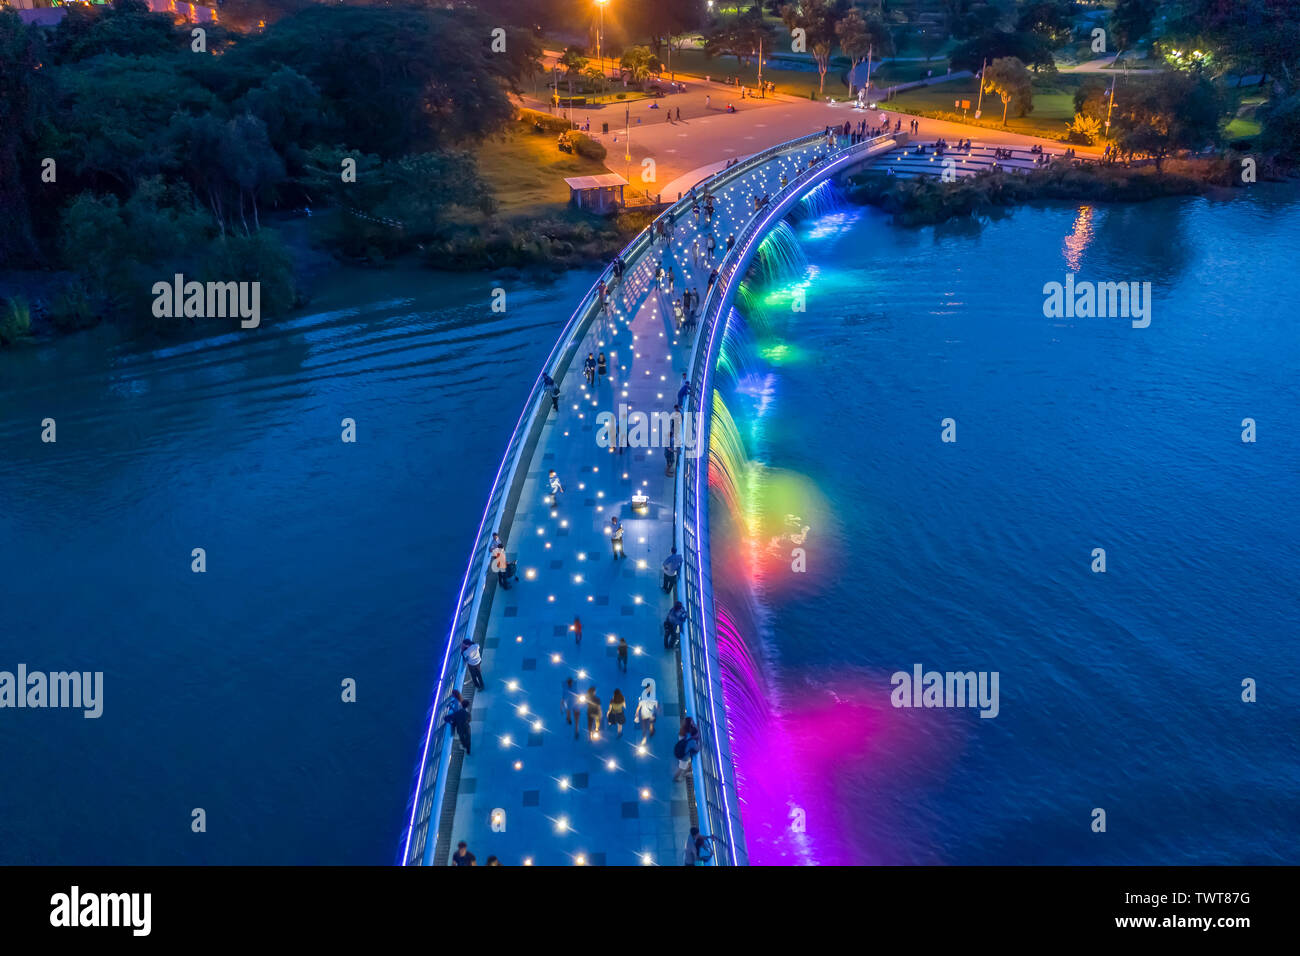 The Anh Sao (Starlight) Bridge is located in the heart of the international commercial and financial district of Phu My Hung. It is the first modern p Stock Photo